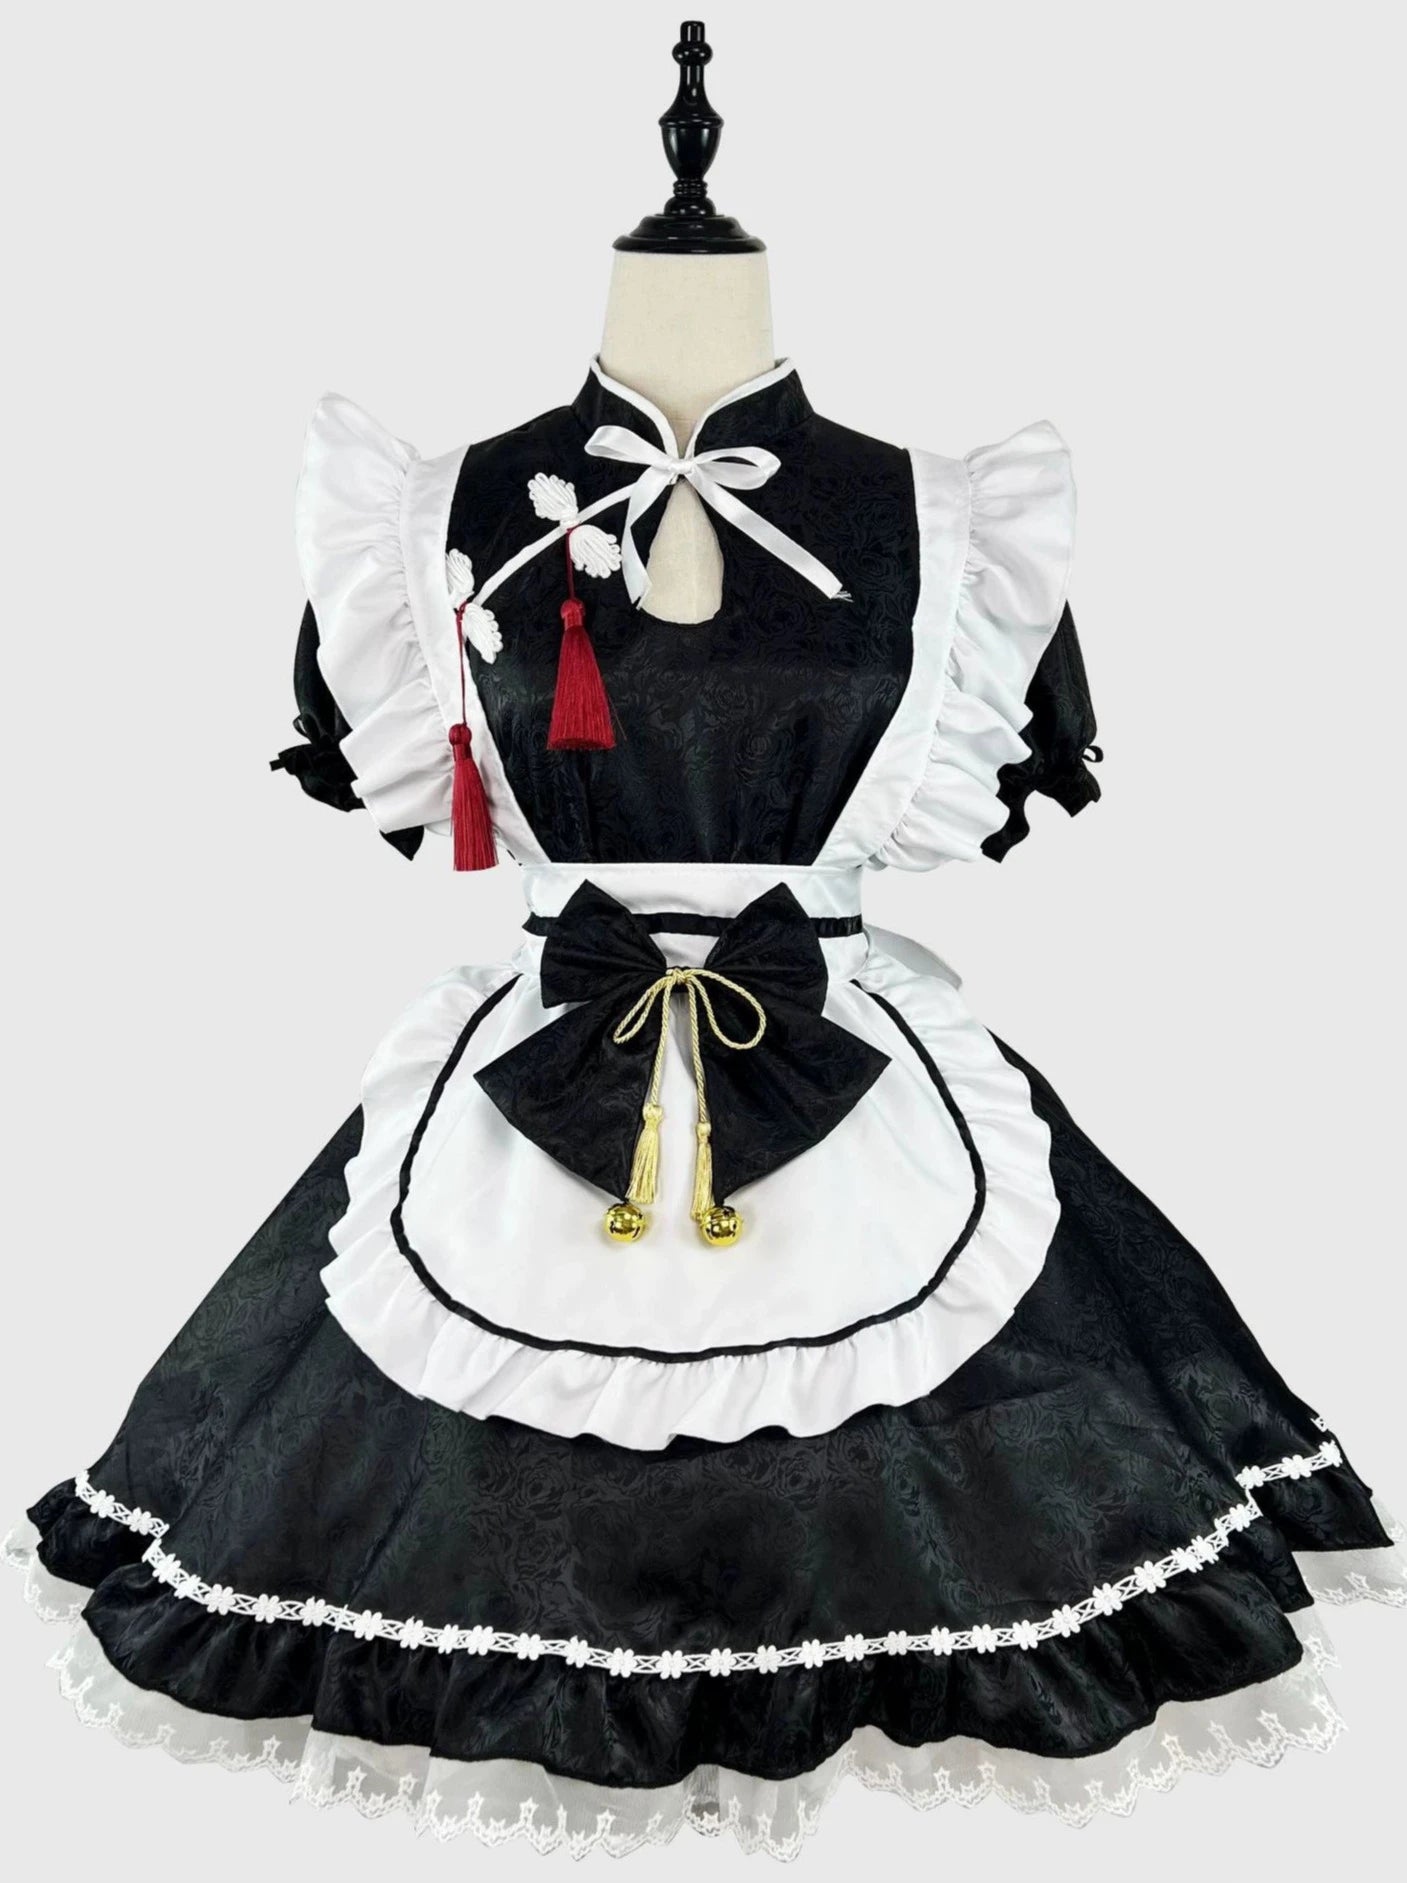 Next-generation/original innovative Chinese style Chinese style black and white maid buckle bow cosplay dress